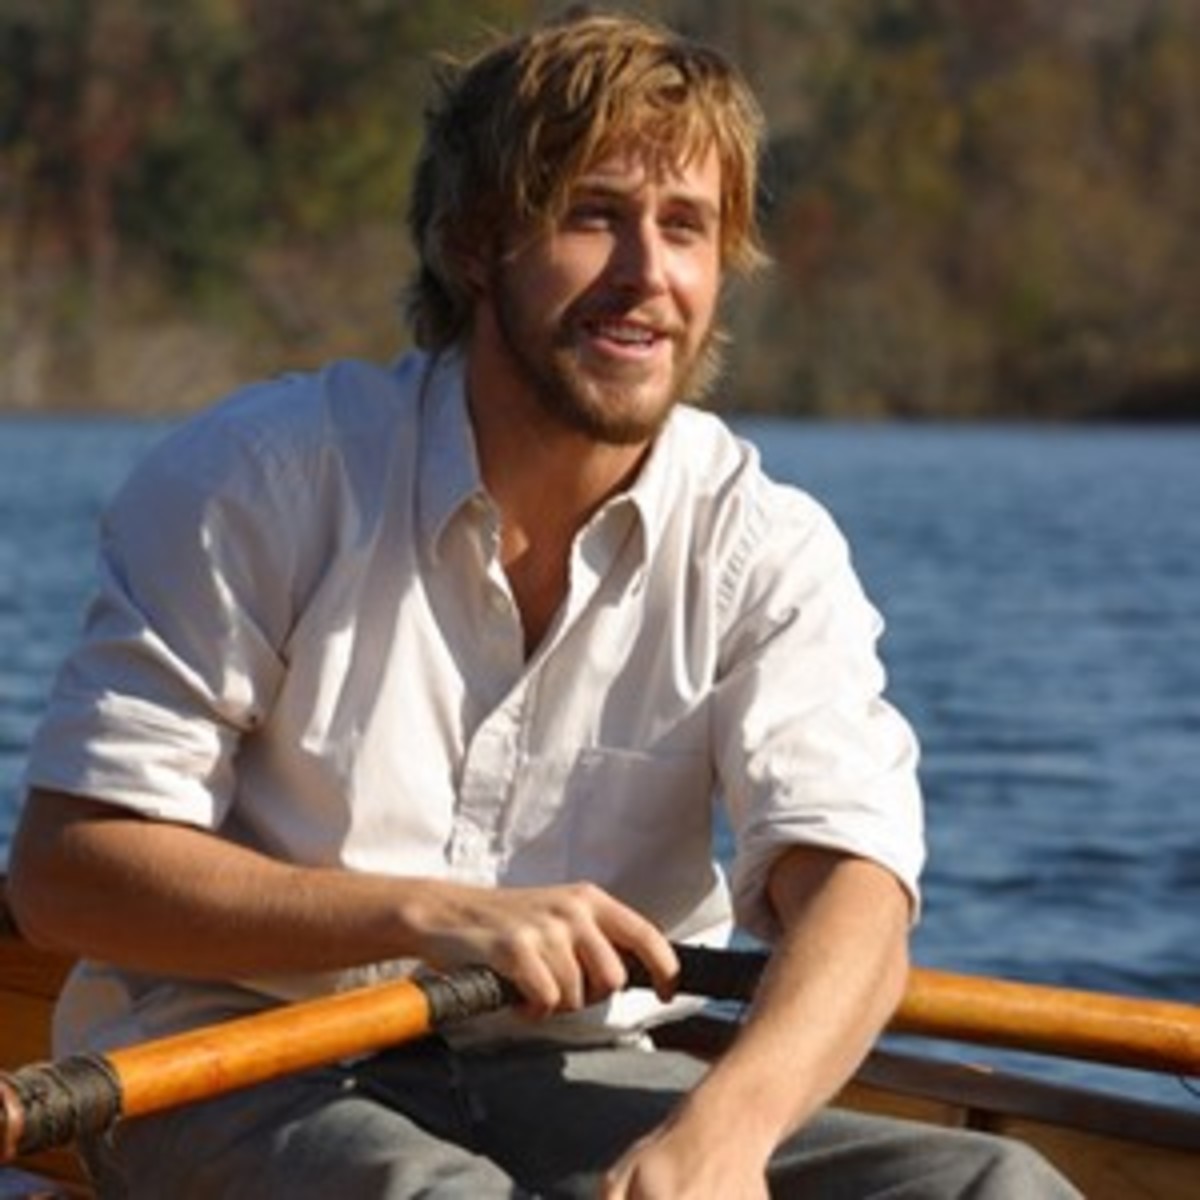 Ryan Gosling as Noah in a row boat, in The Notebook the movie